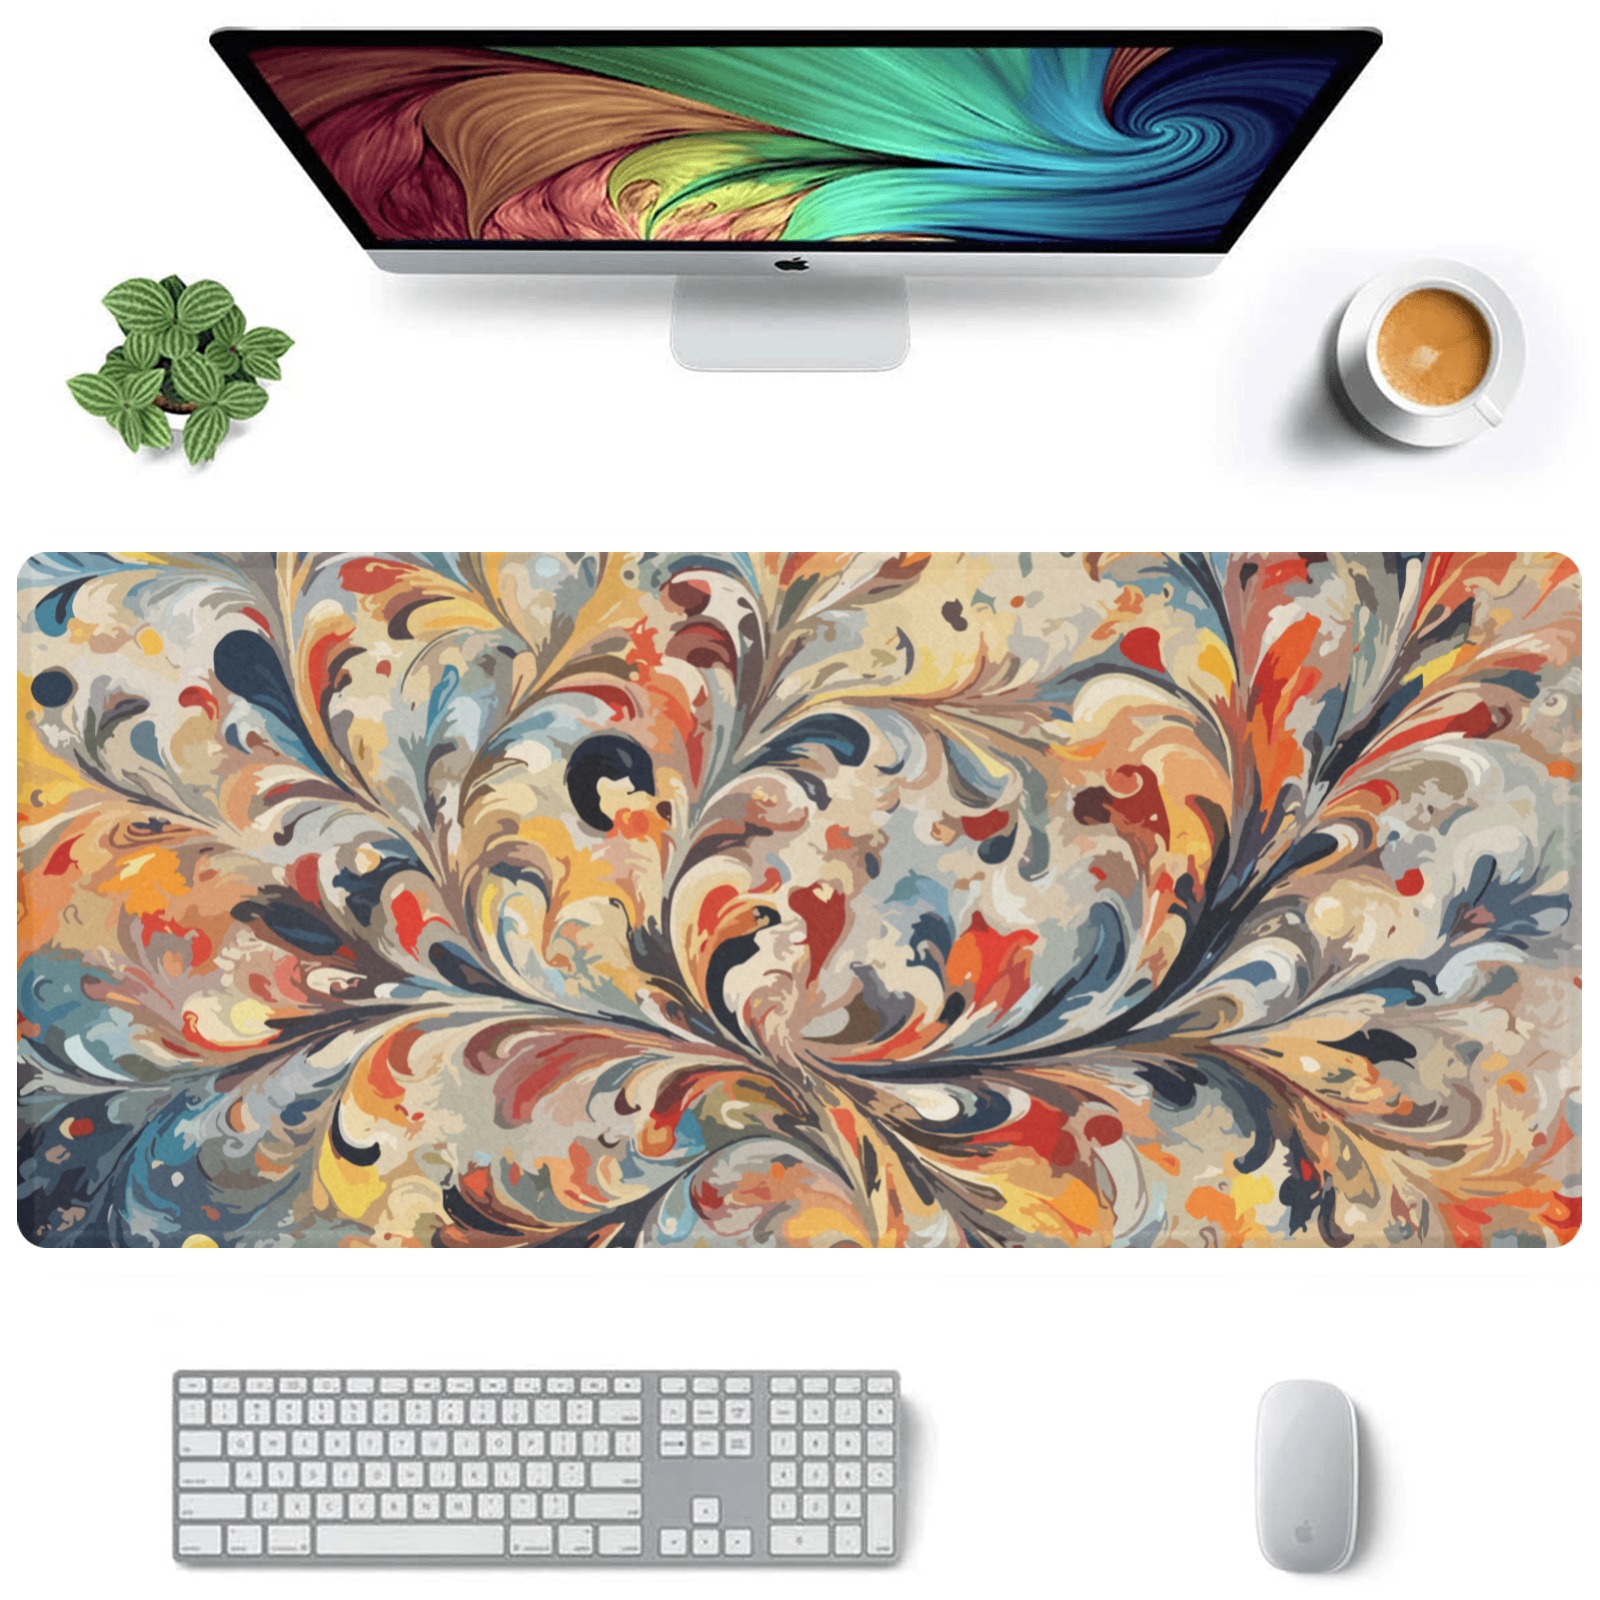 Stylish floral ornament. Beautiful colorful art Gaming Mousepad (35"x16")